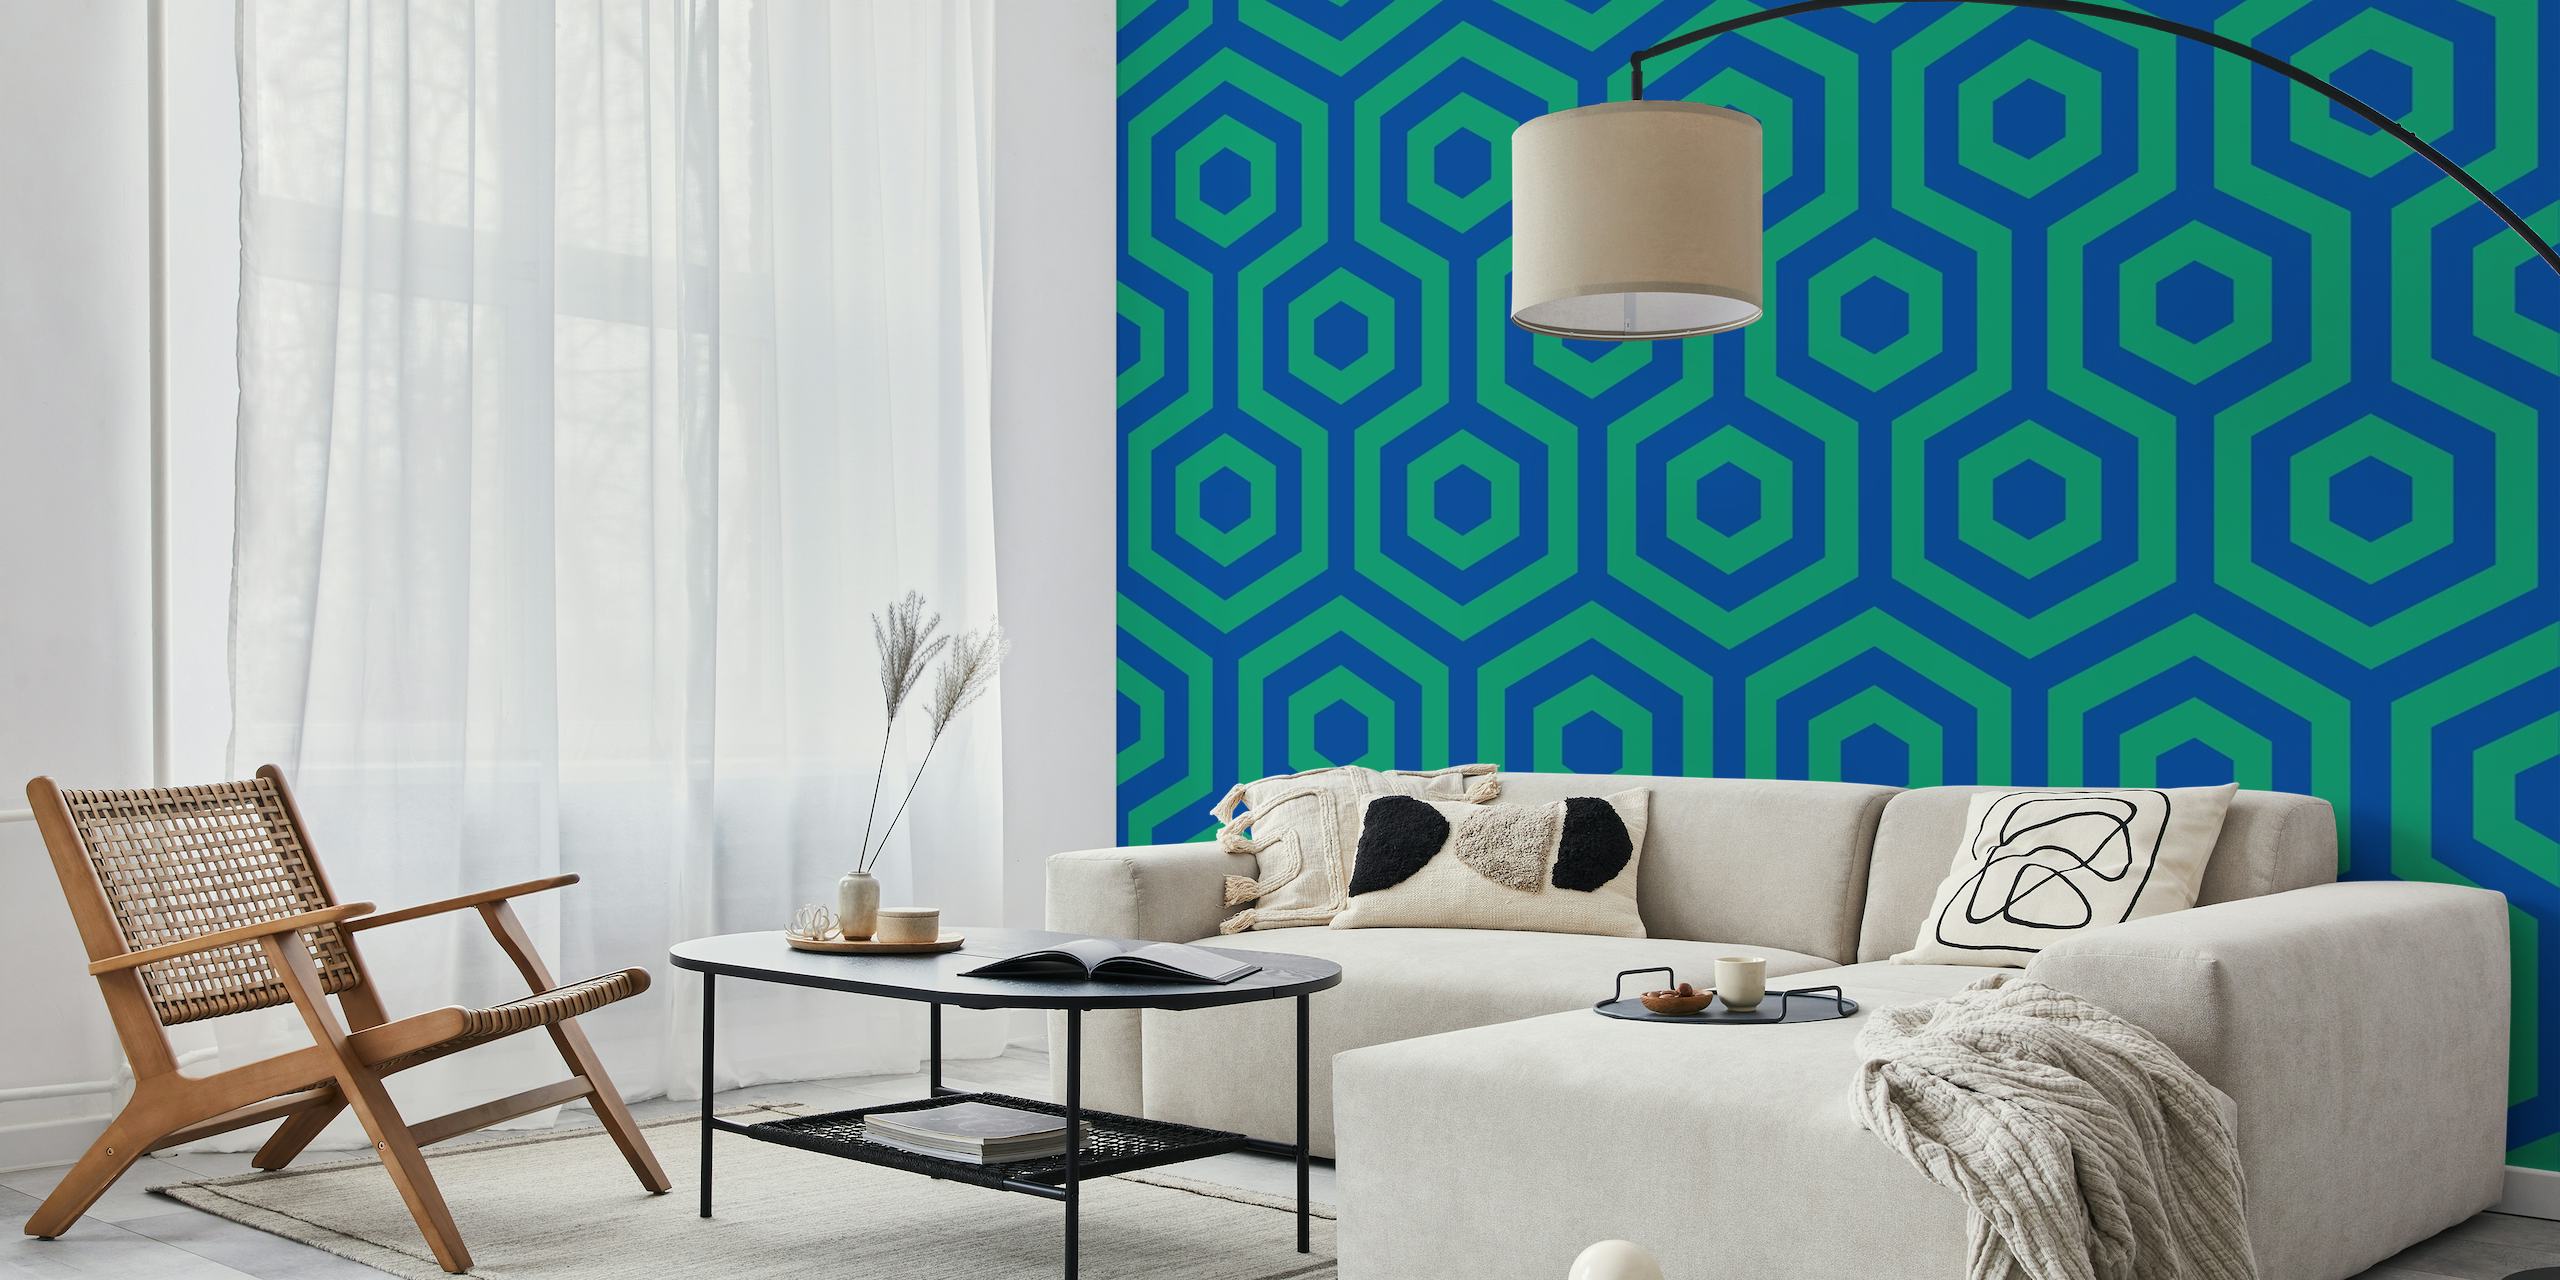 Geometric beehive pattern wall mural in blue and green